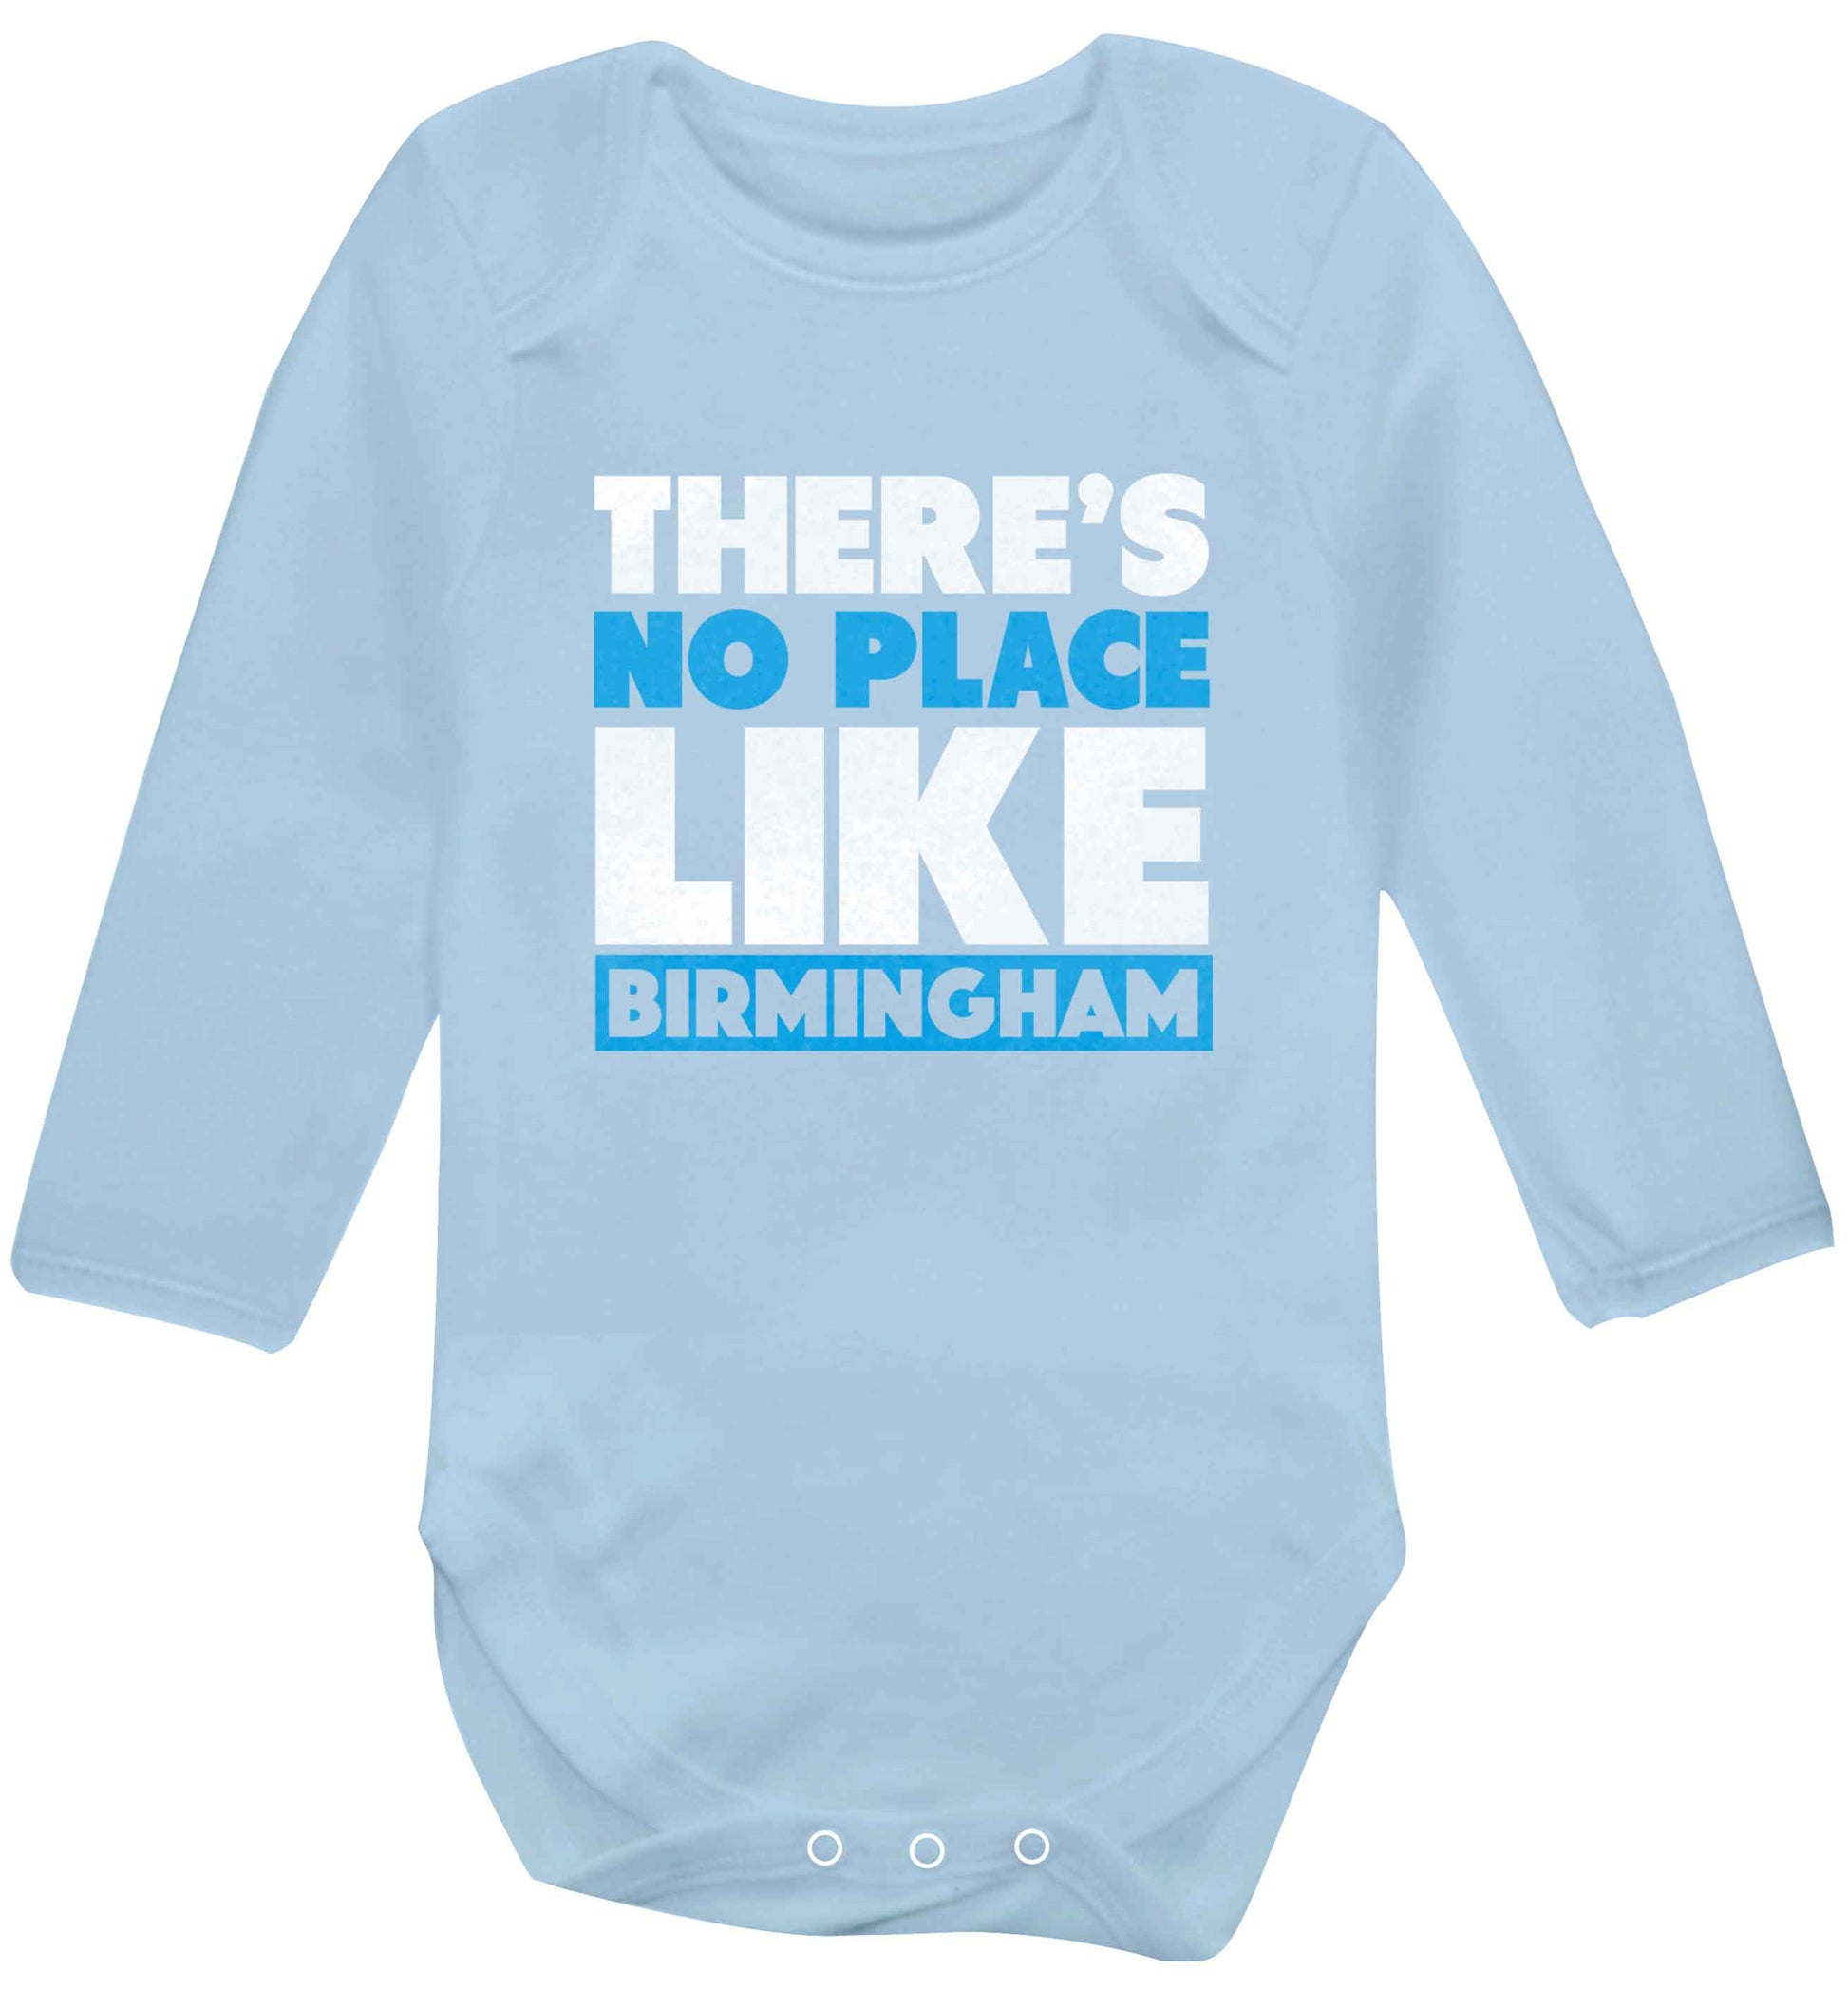 There's no place like Birmingham baby vest long sleeved pale blue 6-12 months